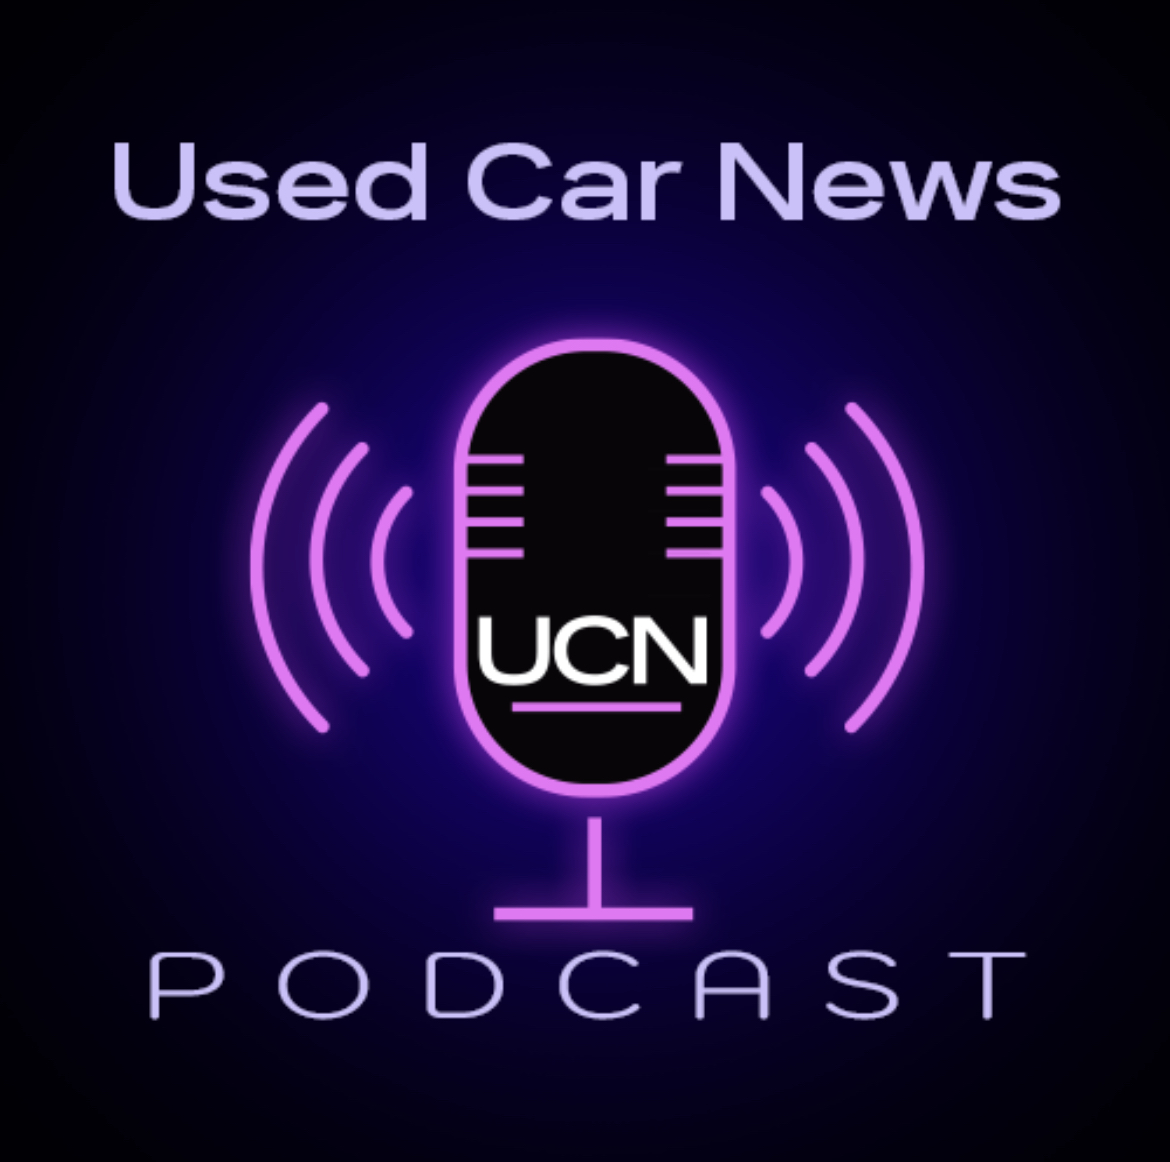 Used Car News: Interview With Tom Kondrat From Urban Science